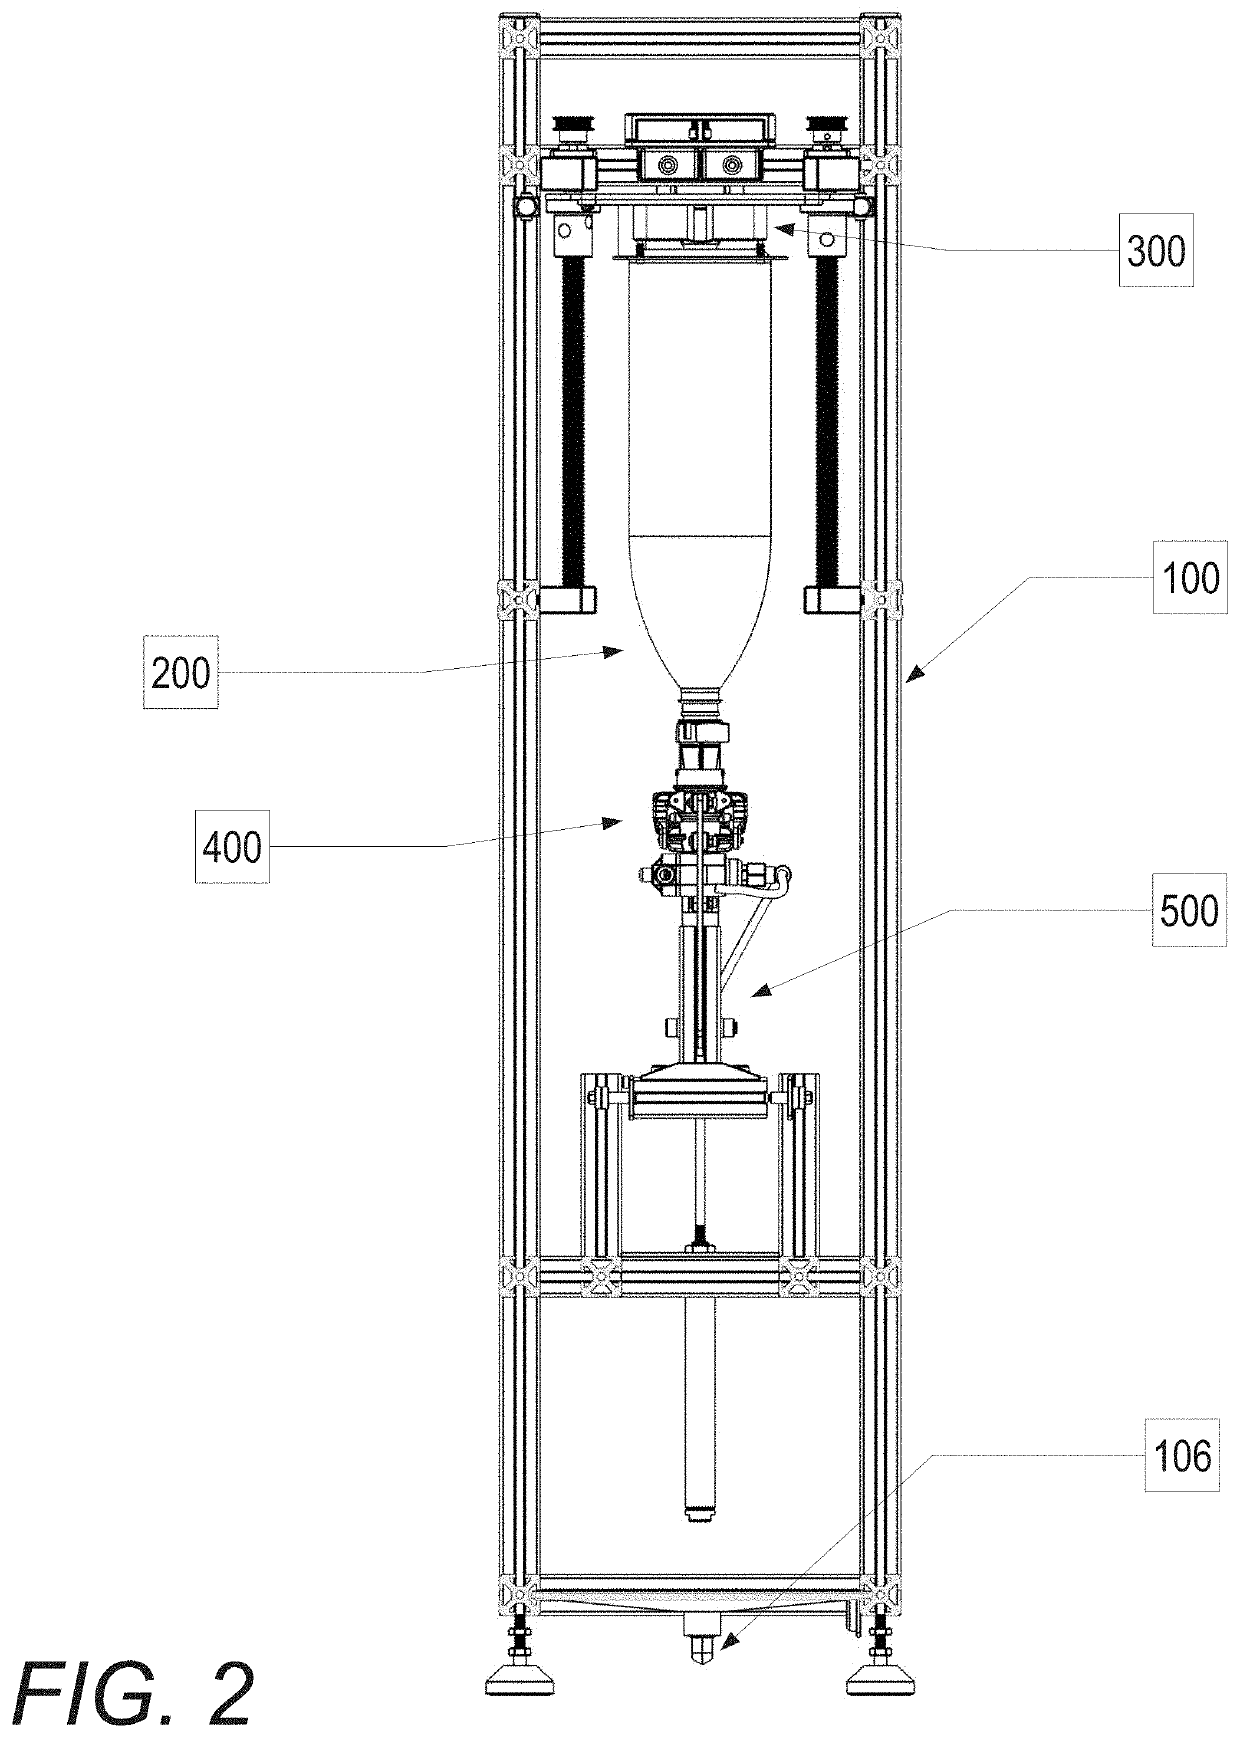 Apparatus and method for testing liquid propelled rocket